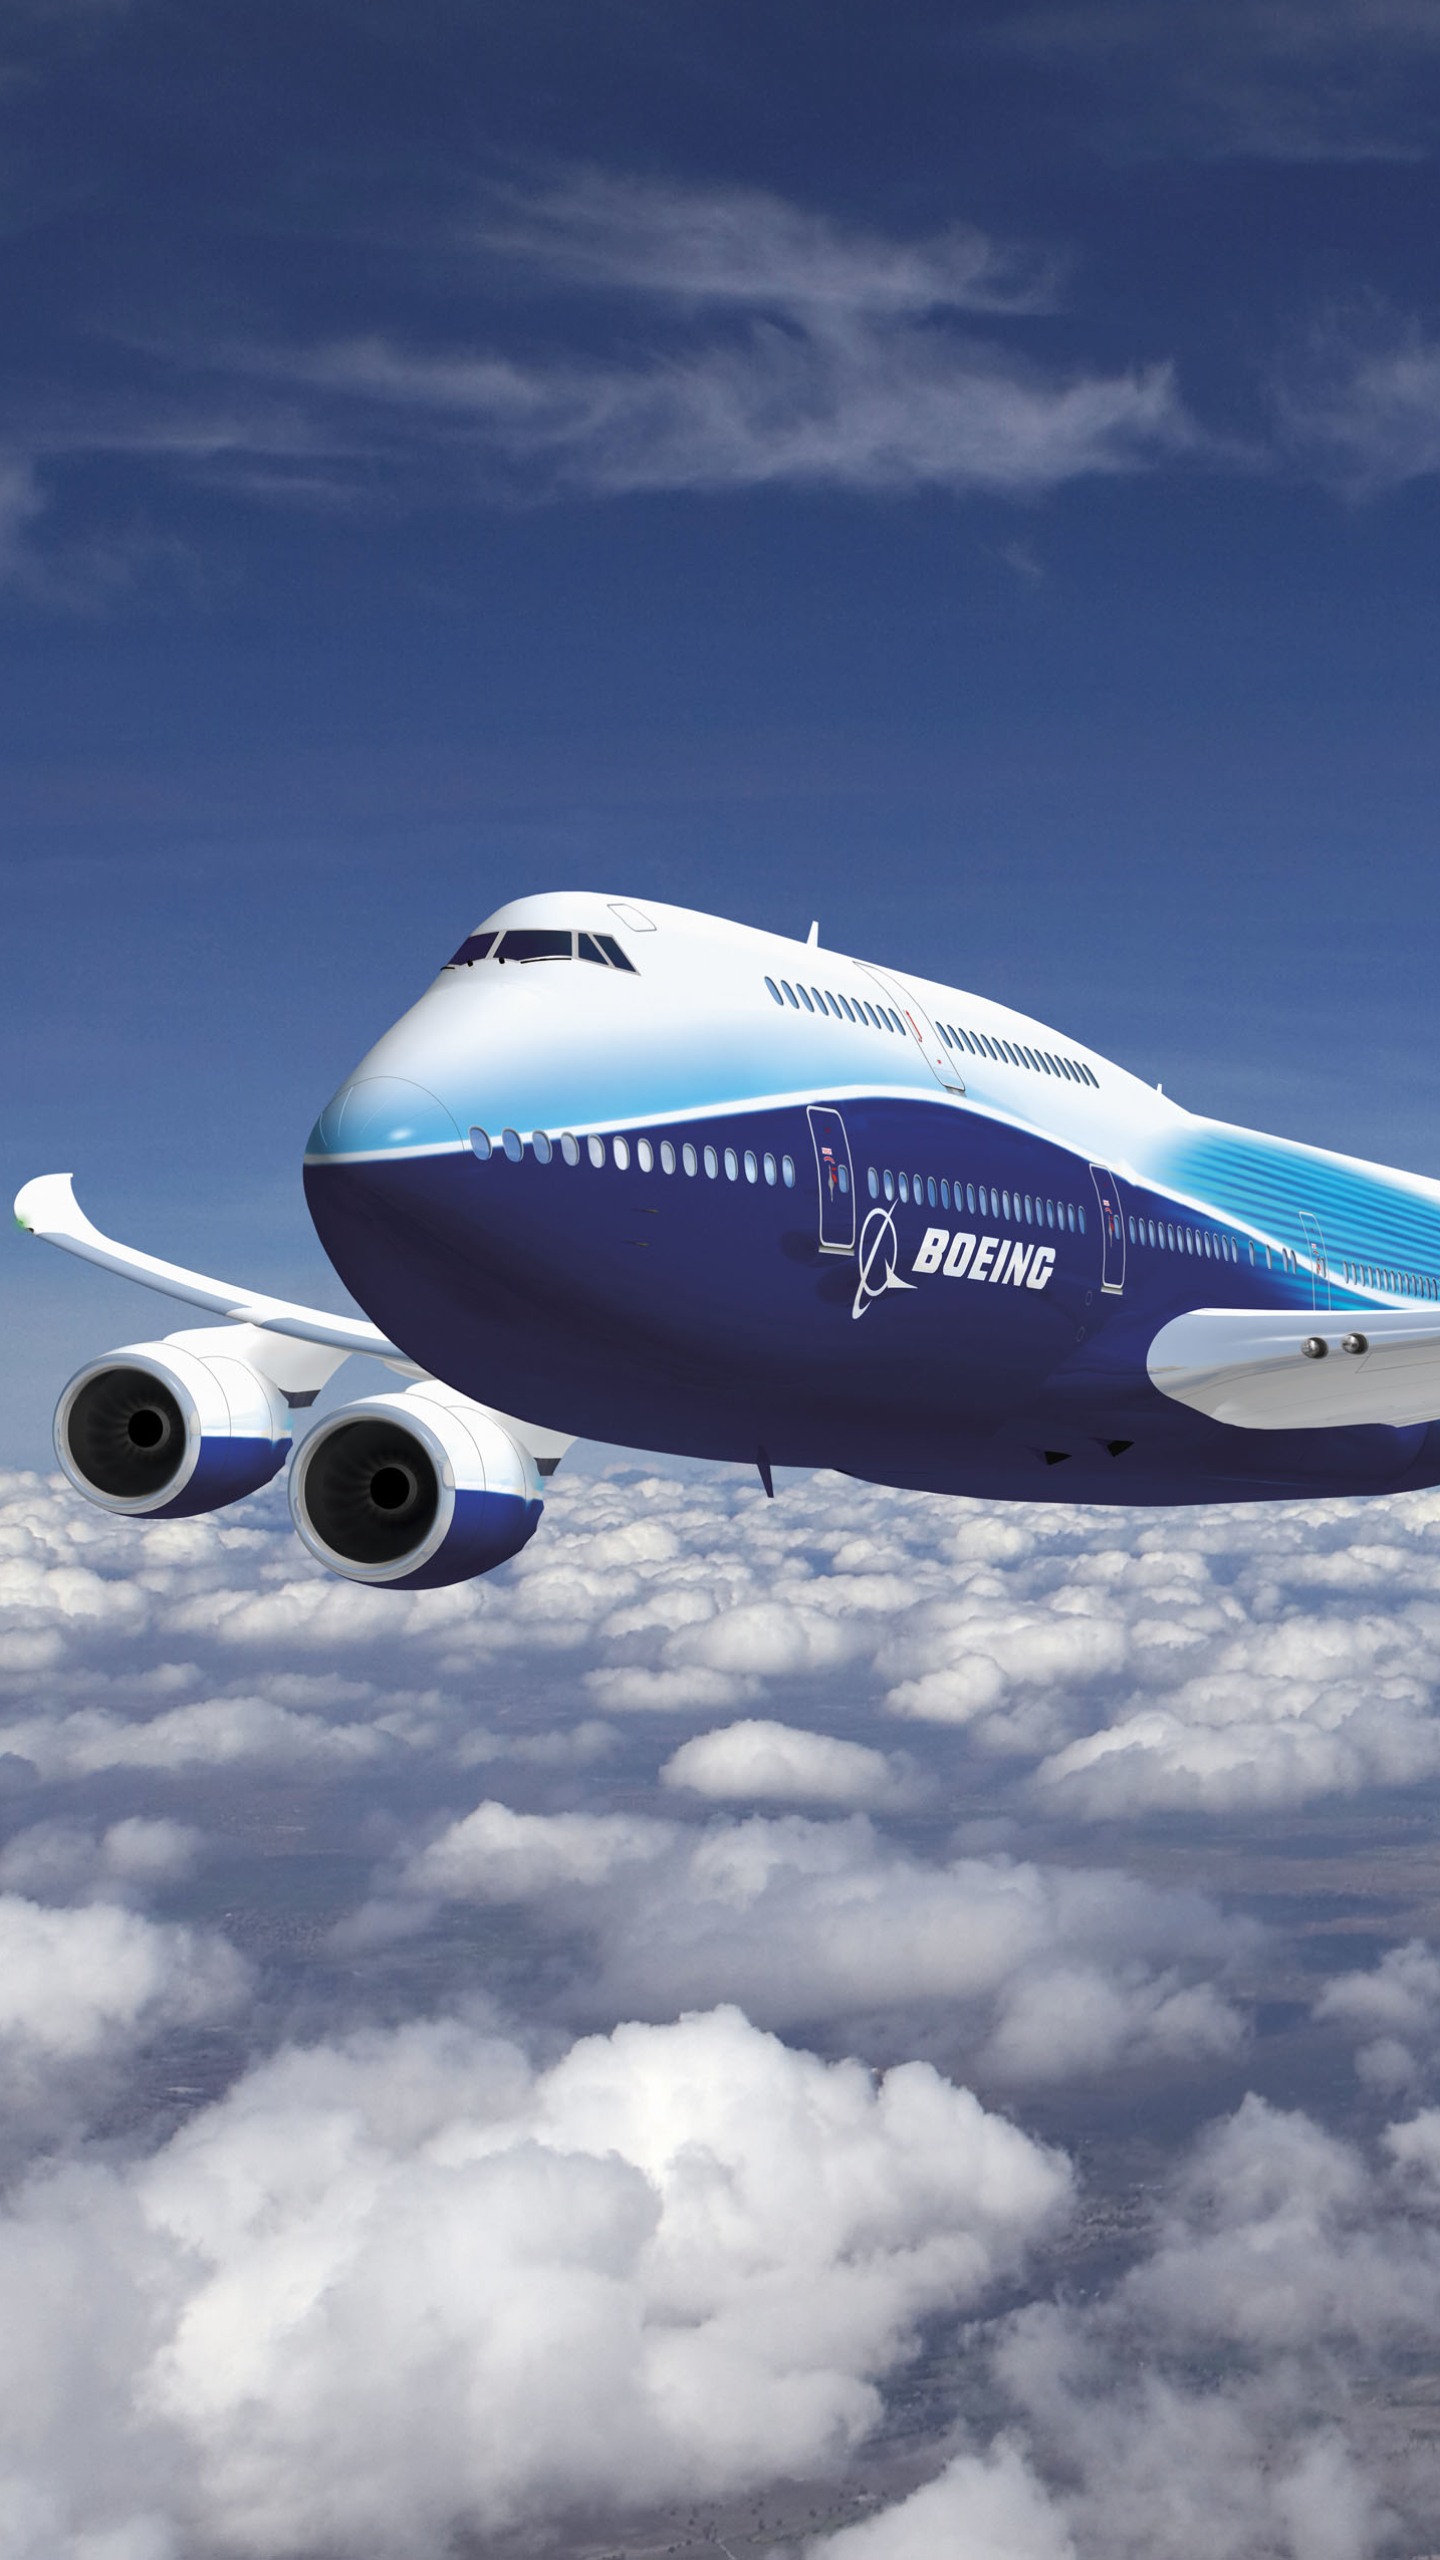 boeing 747, vehicles, aircraft, cloud